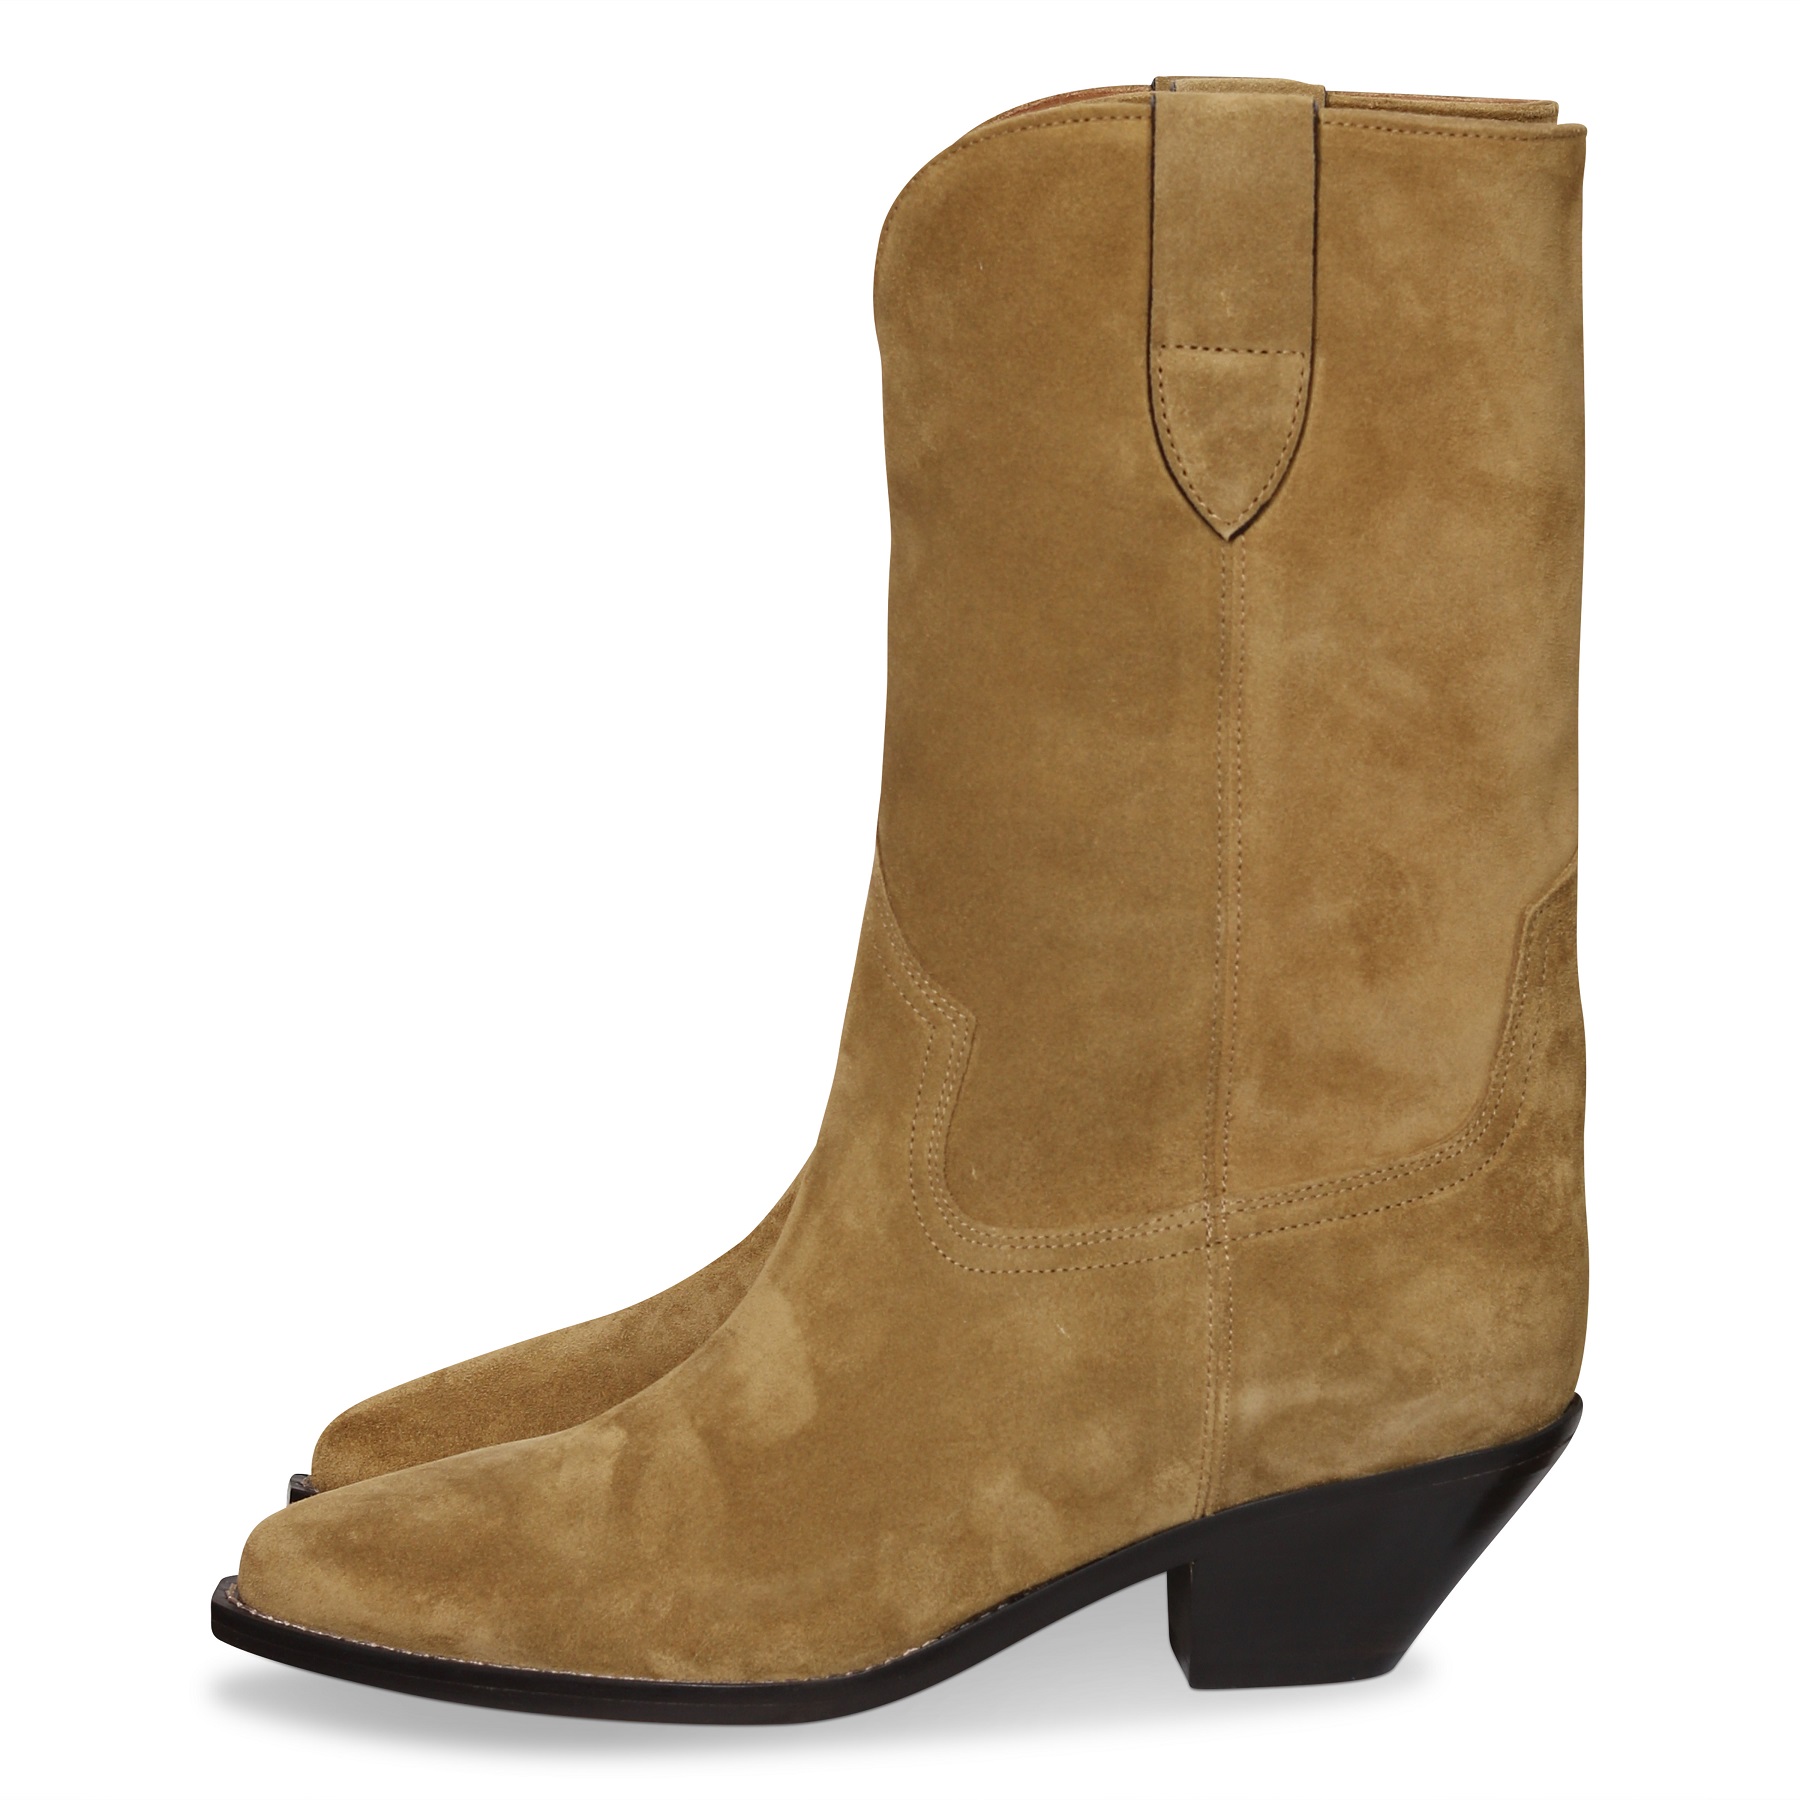 ISABEL MARANT Dahope Boots in Taupe 39